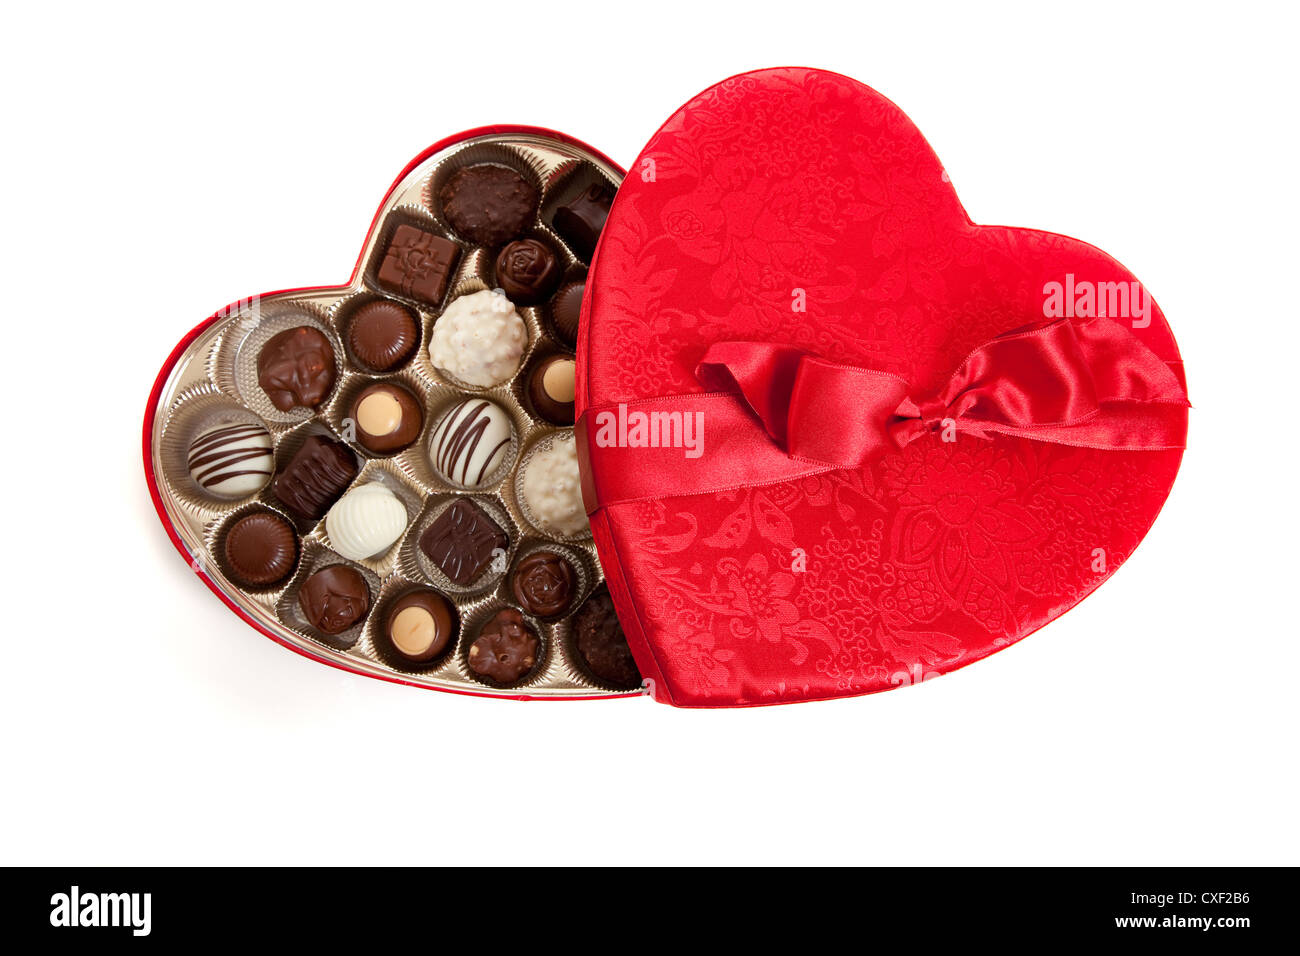 Esther Price Heart-Shaped Chocolate Box